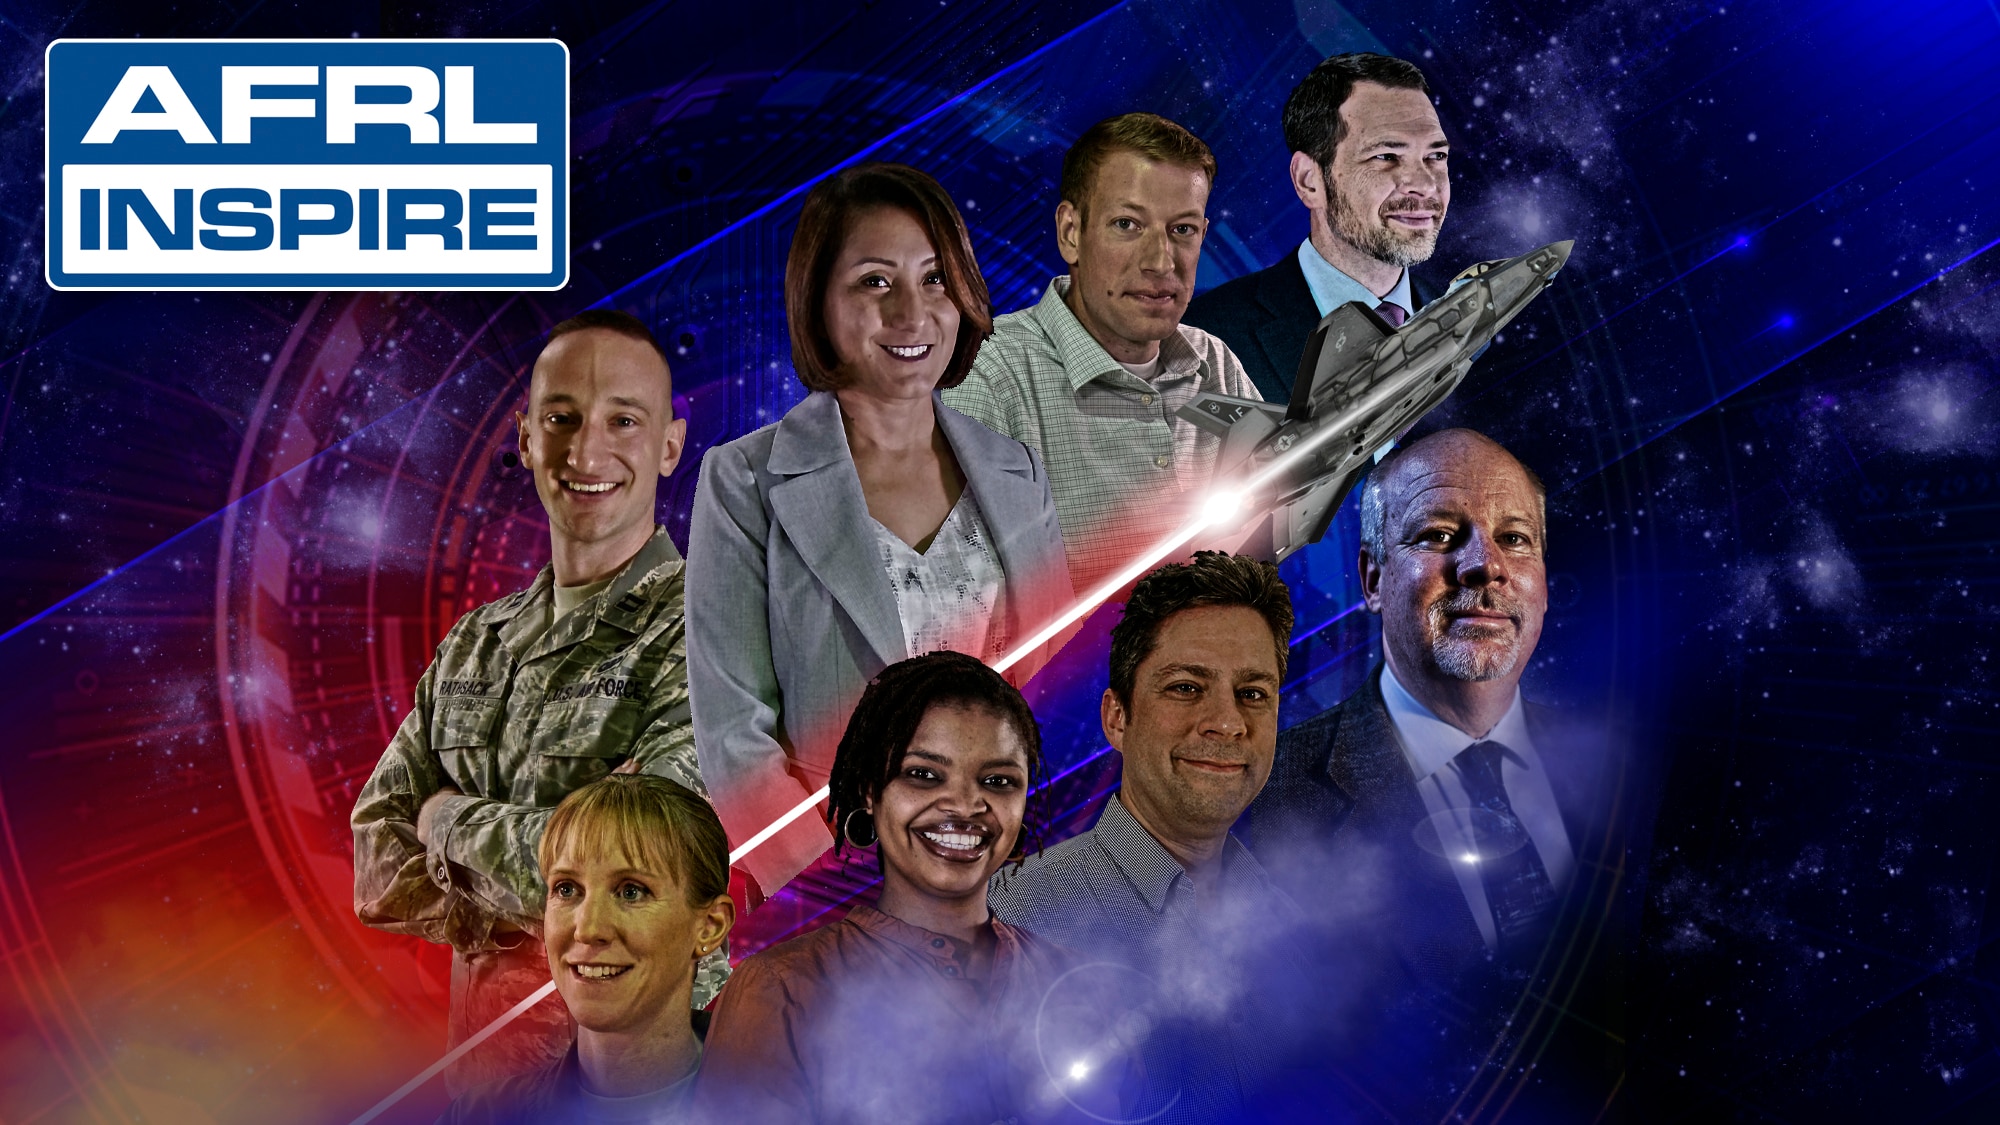 AFRL Inspire showcases innovative ideas and passionate people. This year’s event featured Capt. Tylor Rathsack, Sara Telano, John Henry Williams, Dr. James Sumpter, Lt. Col. Olivia “Pi” Elliott, Dr. Nia Peters, Dr. James Christensen and Dr. Joel Mozer. (U.S. Air Force photo illustration/Keith Lewis)